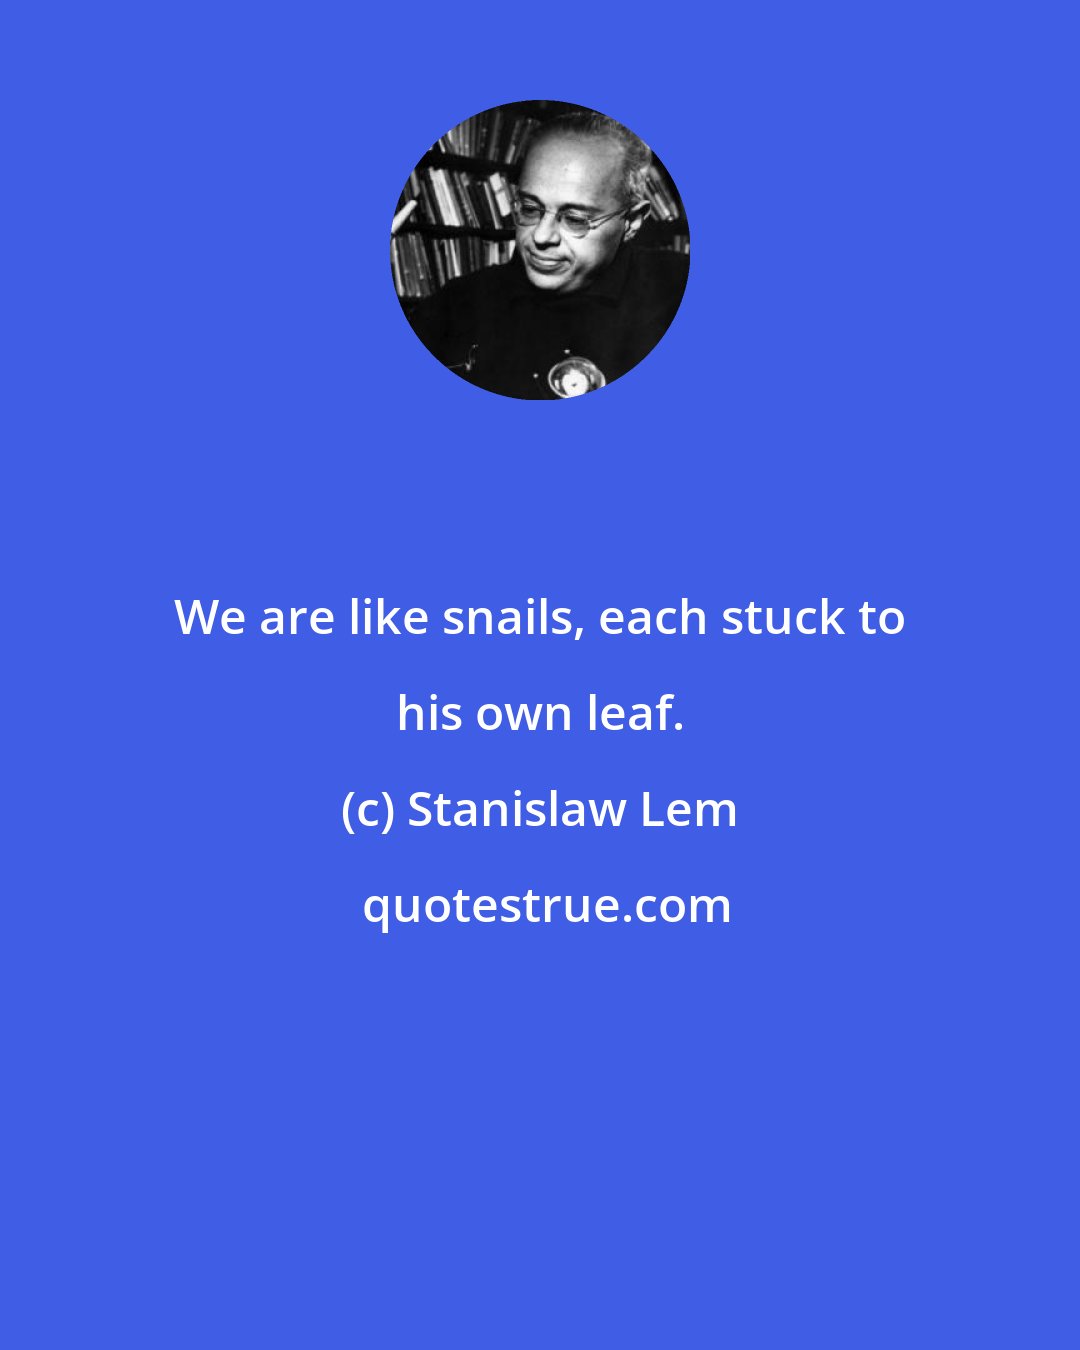 Stanislaw Lem: We are like snails, each stuck to his own leaf.